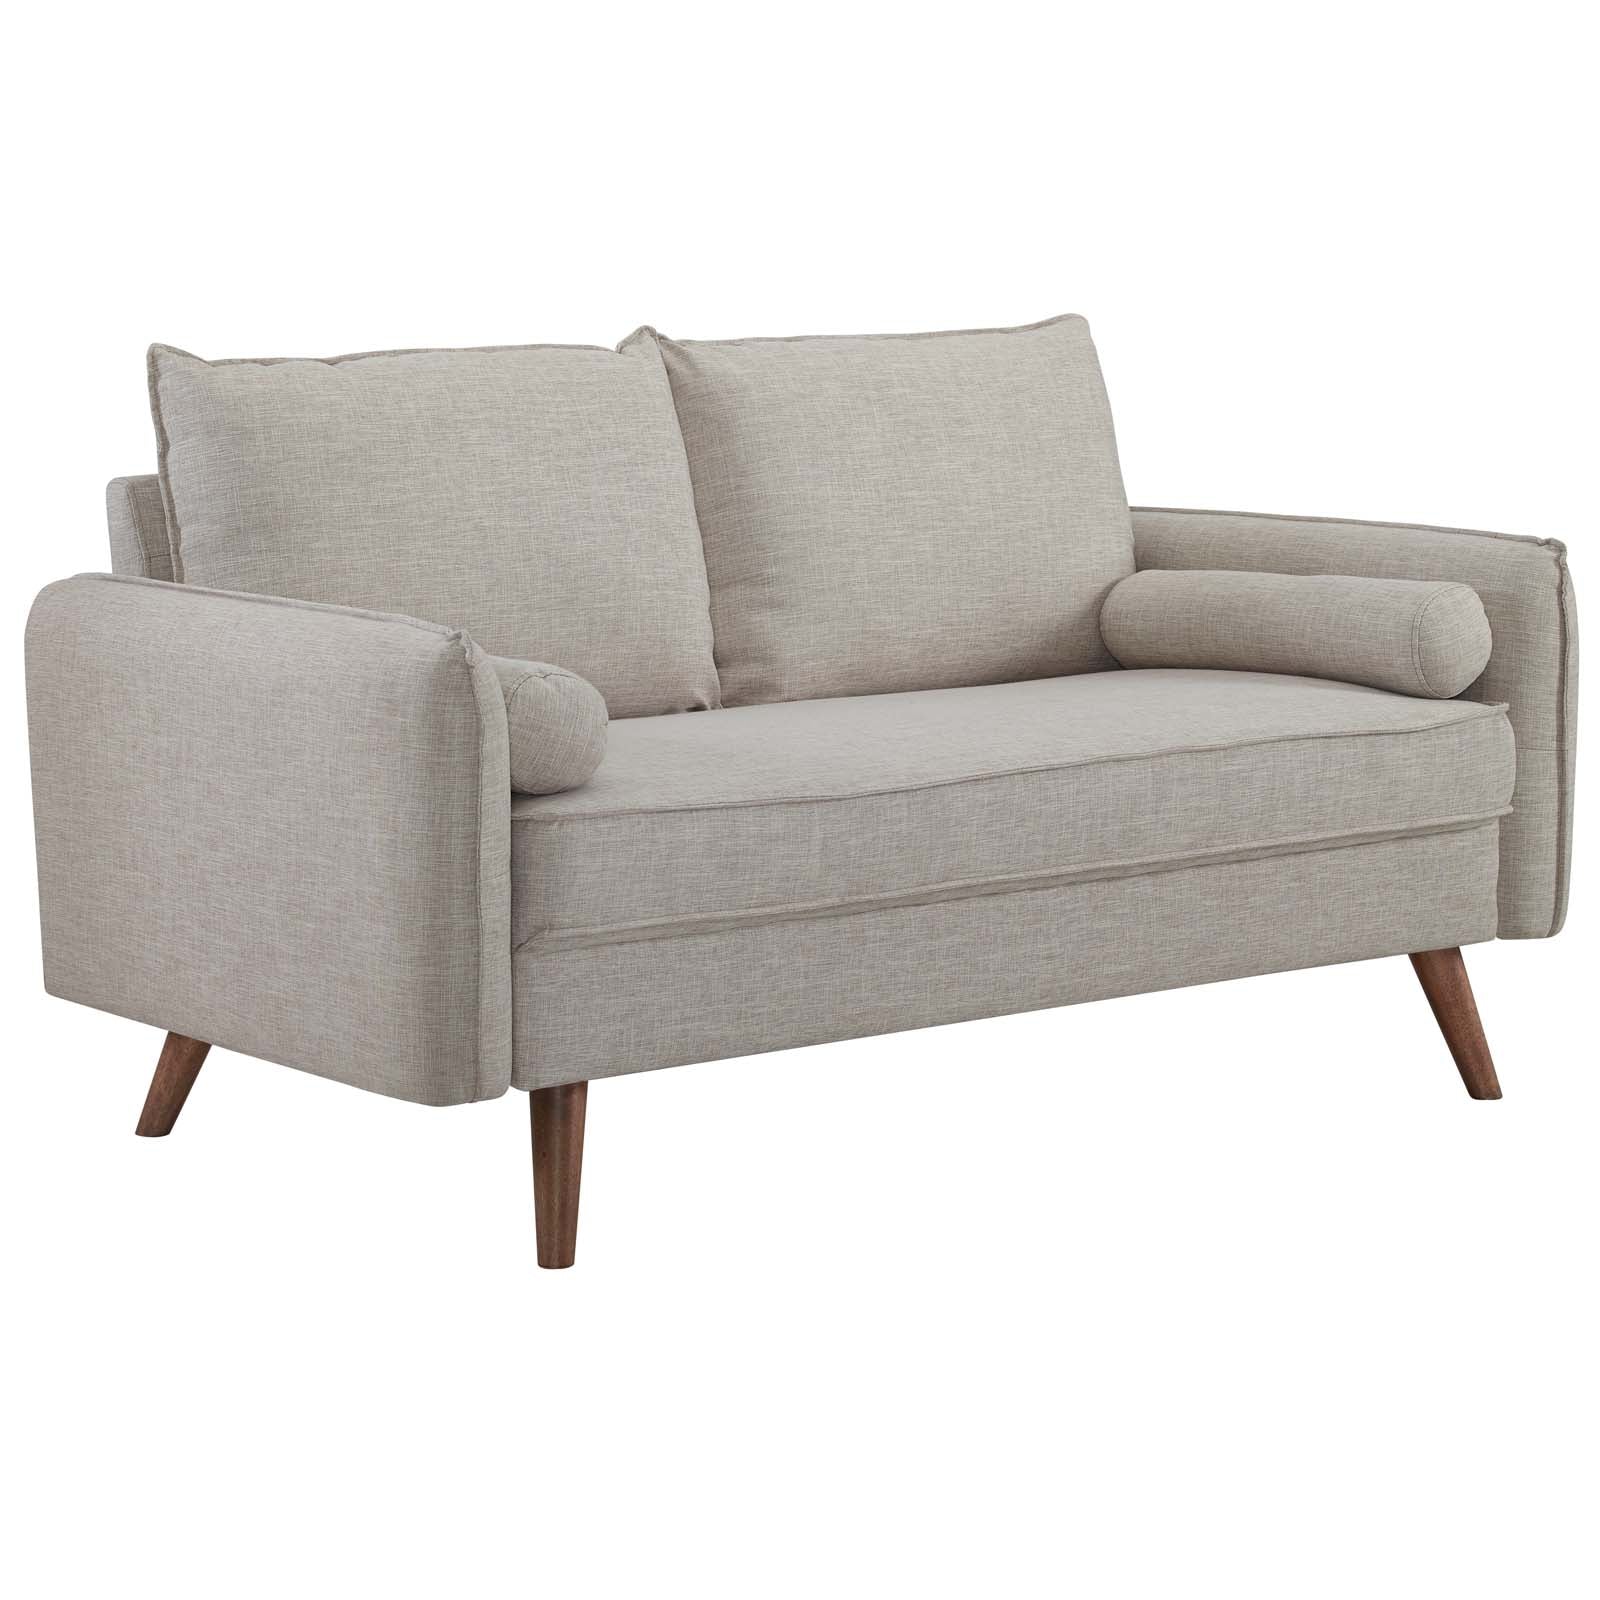 Modway Sofas & Couches - Revive-Upholstered-Fabric-Sofa-and-Loveseat-Set-Beige